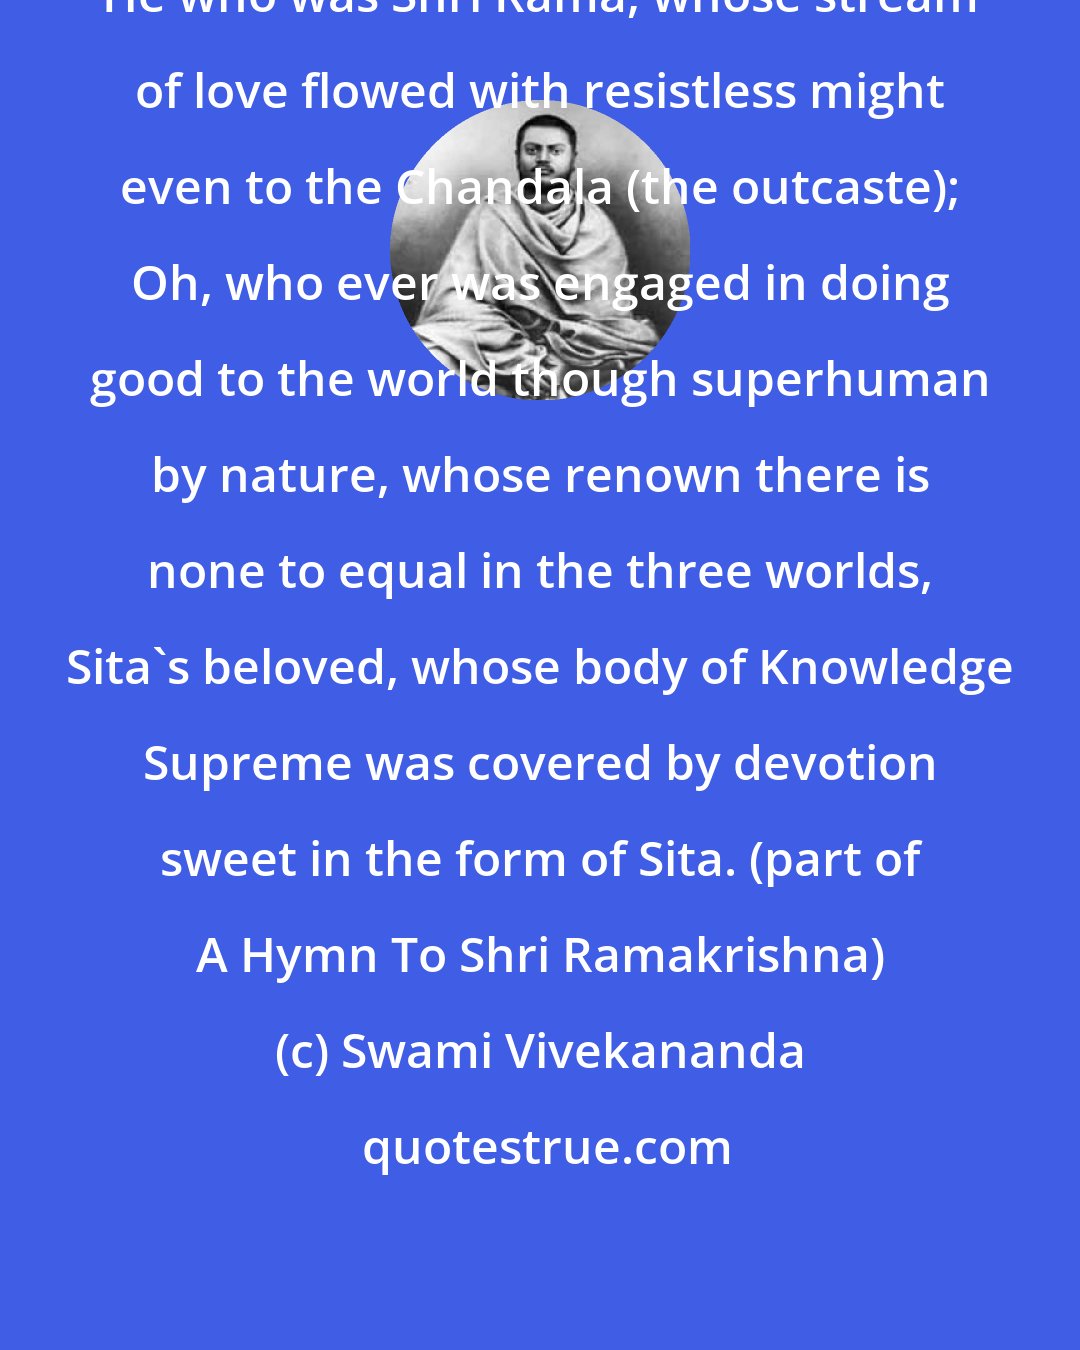 Swami Vivekananda: He who was Shri Rama, whose stream of love flowed with resistless might even to the Chandala (the outcaste); Oh, who ever was engaged in doing good to the world though superhuman by nature, whose renown there is none to equal in the three worlds, Sita's beloved, whose body of Knowledge Supreme was covered by devotion sweet in the form of Sita. (part of A Hymn To Shri Ramakrishna)